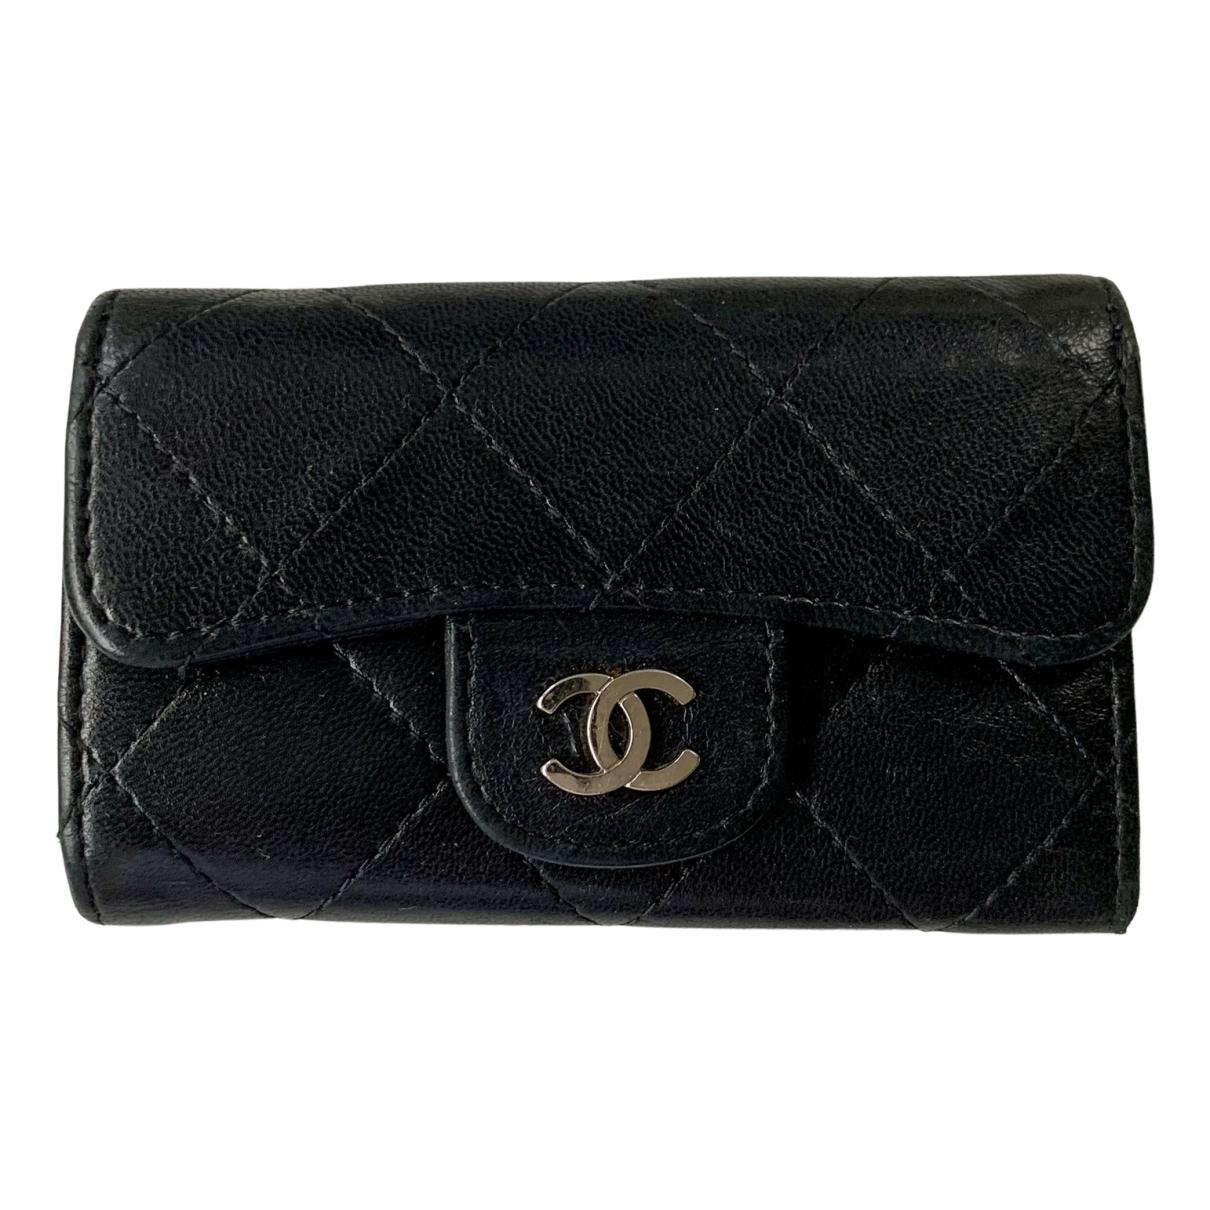 small red chanel purse